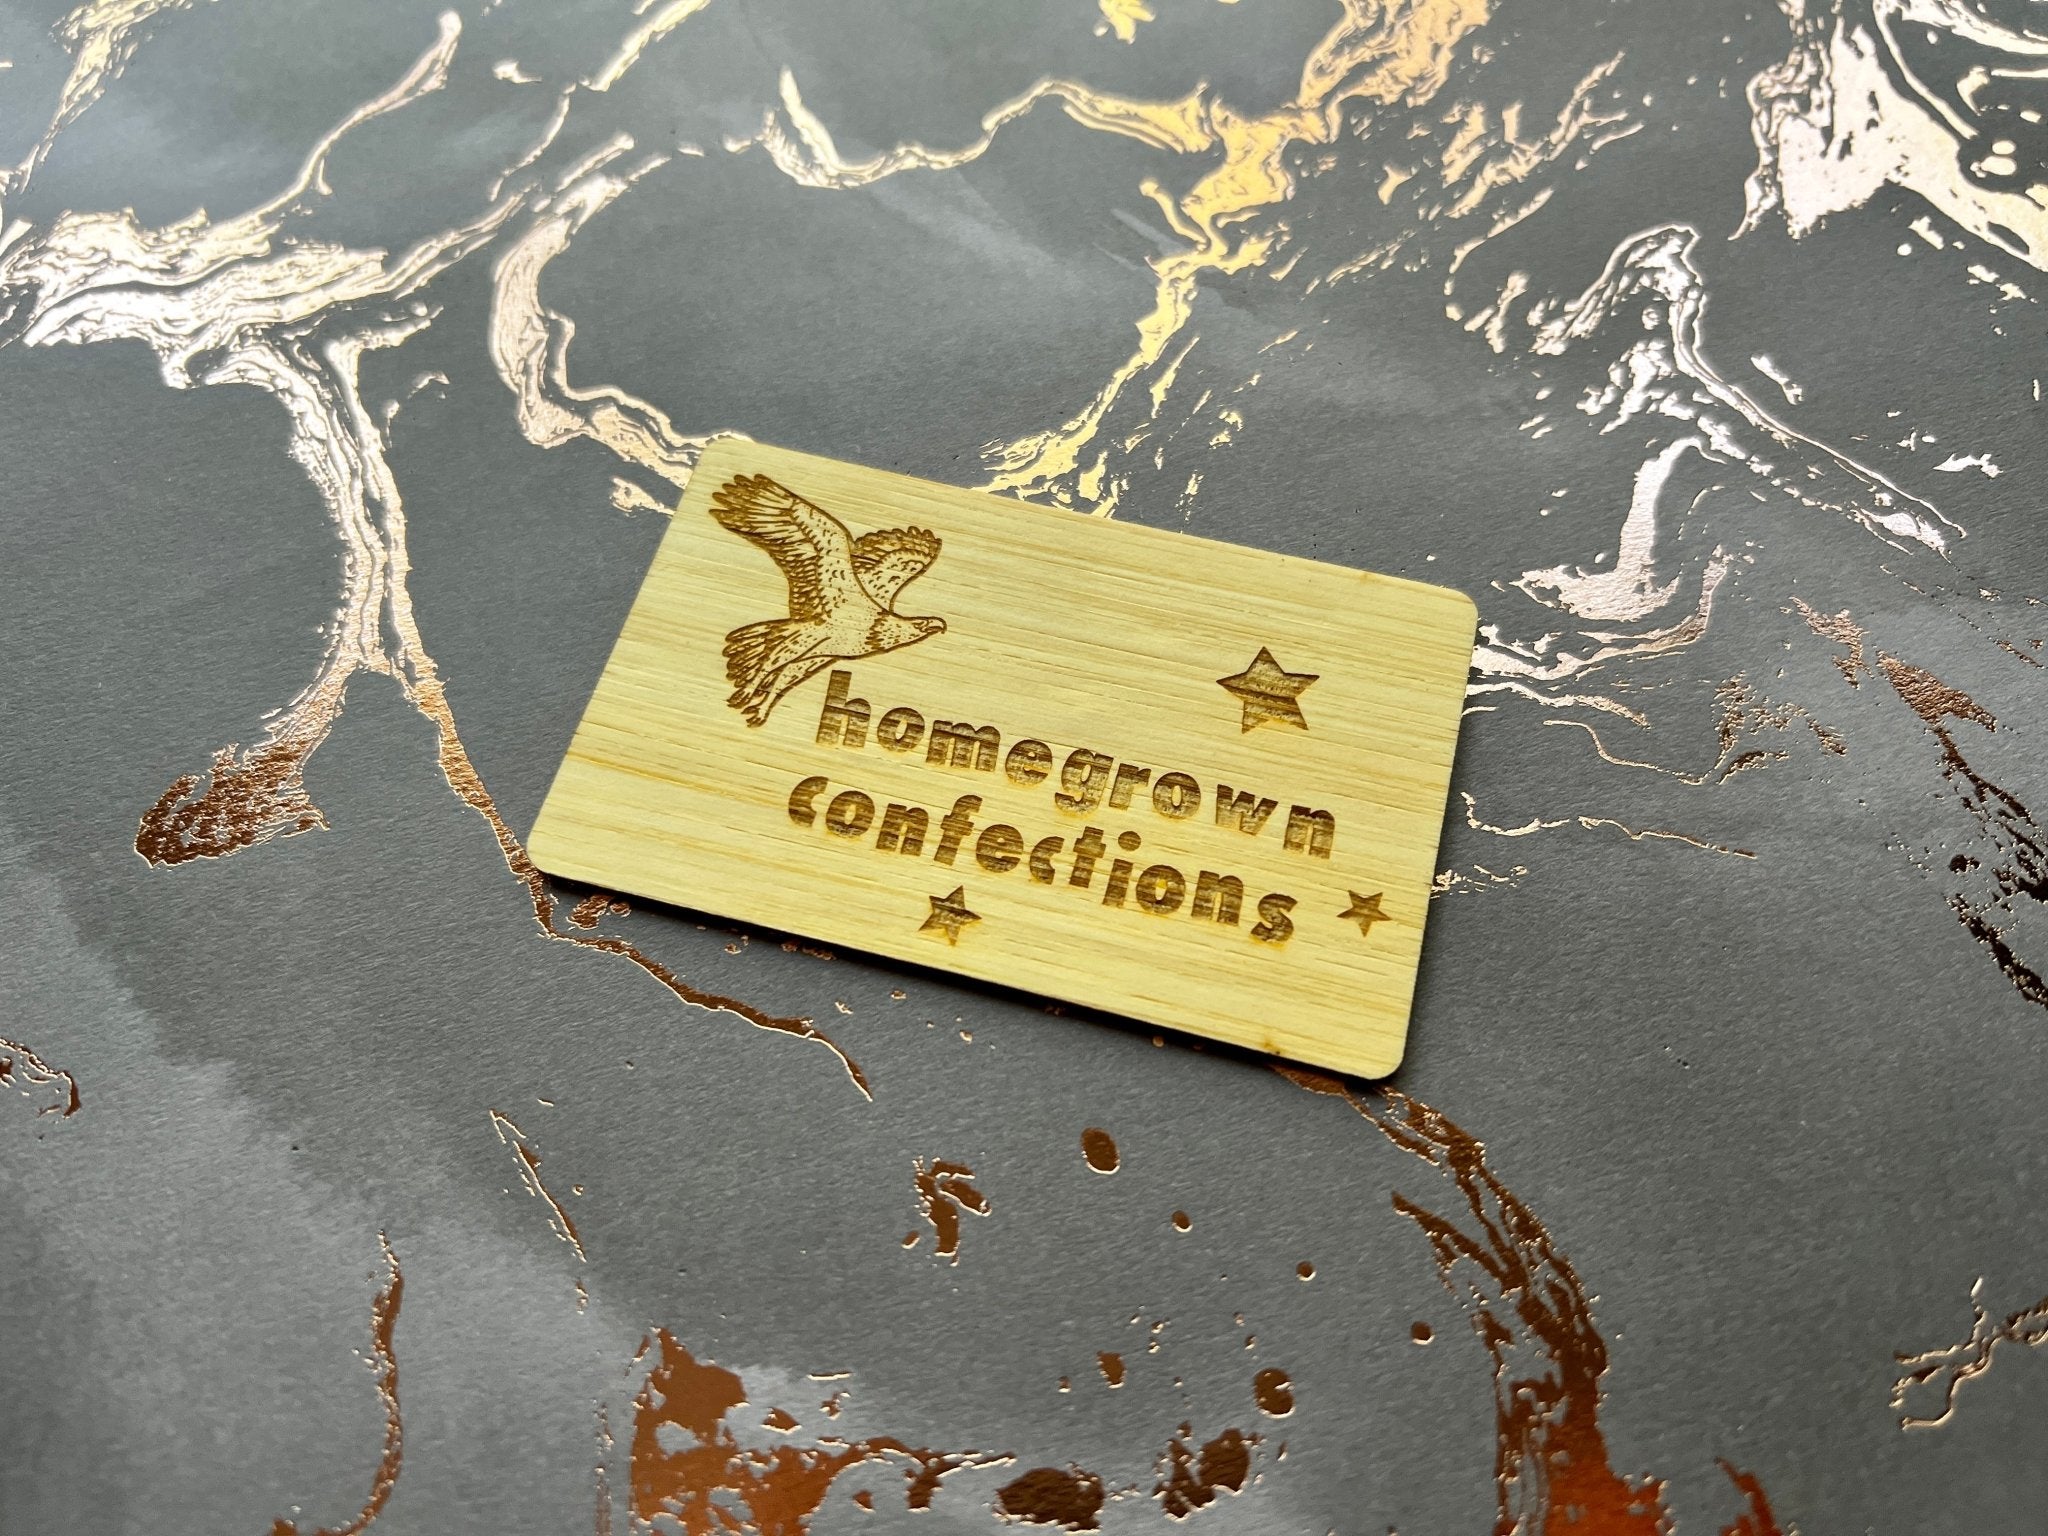 Sustainable Bamboo - NFC Business card - Tap Tag